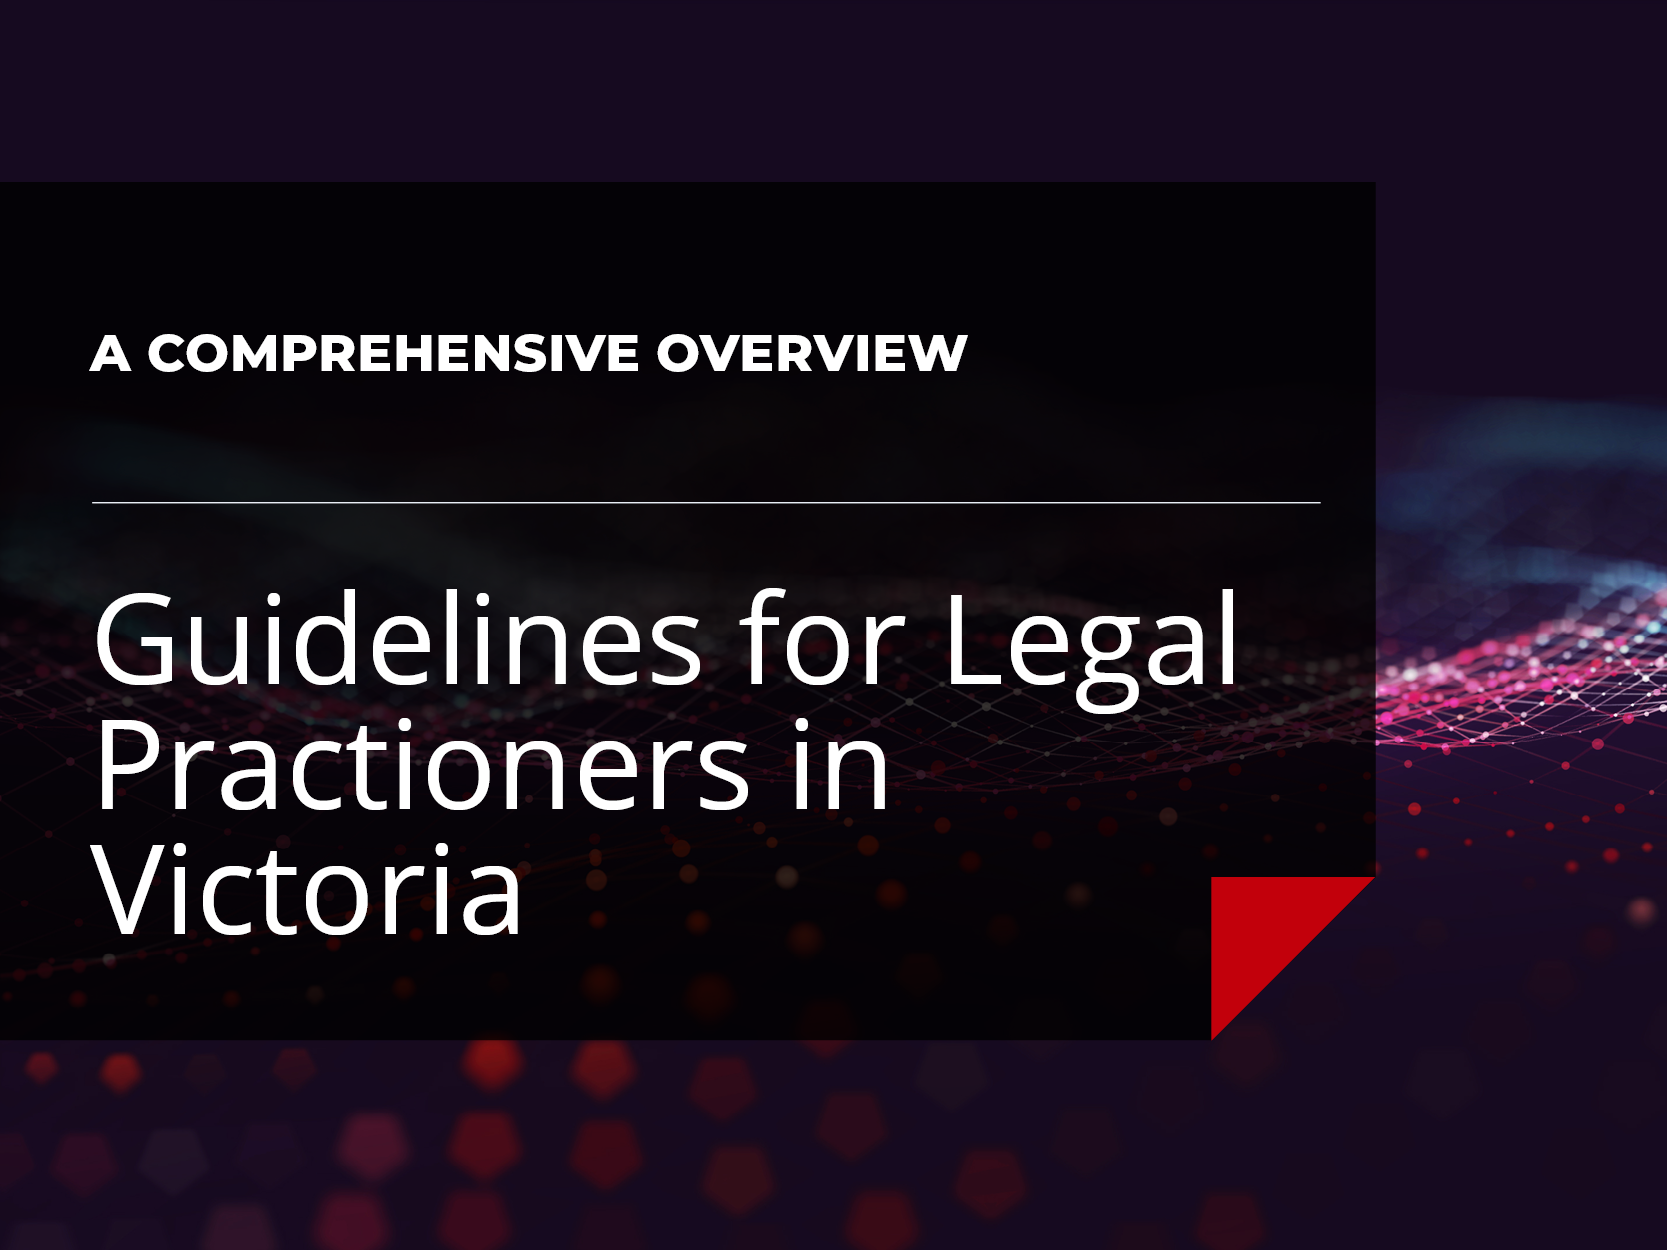 AI guidelines for legal practitioners in Victoria